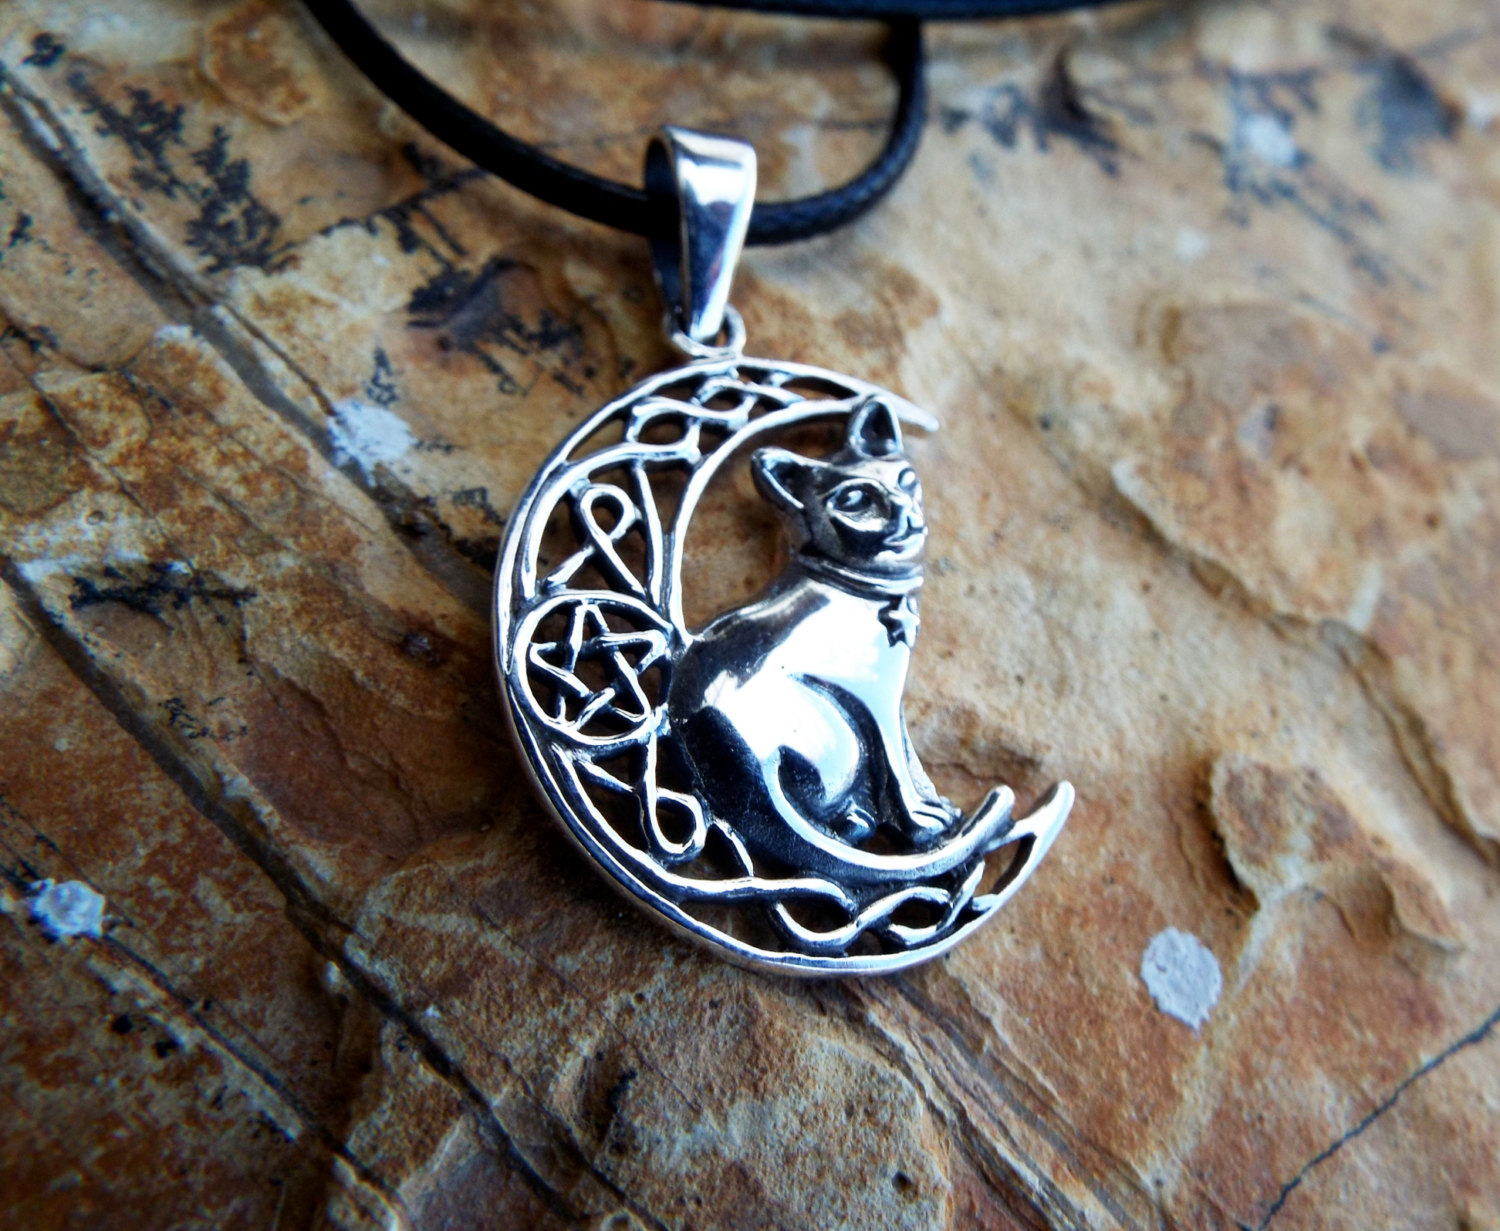 Sterling Silver Cat on the Moon Pendant Necklace